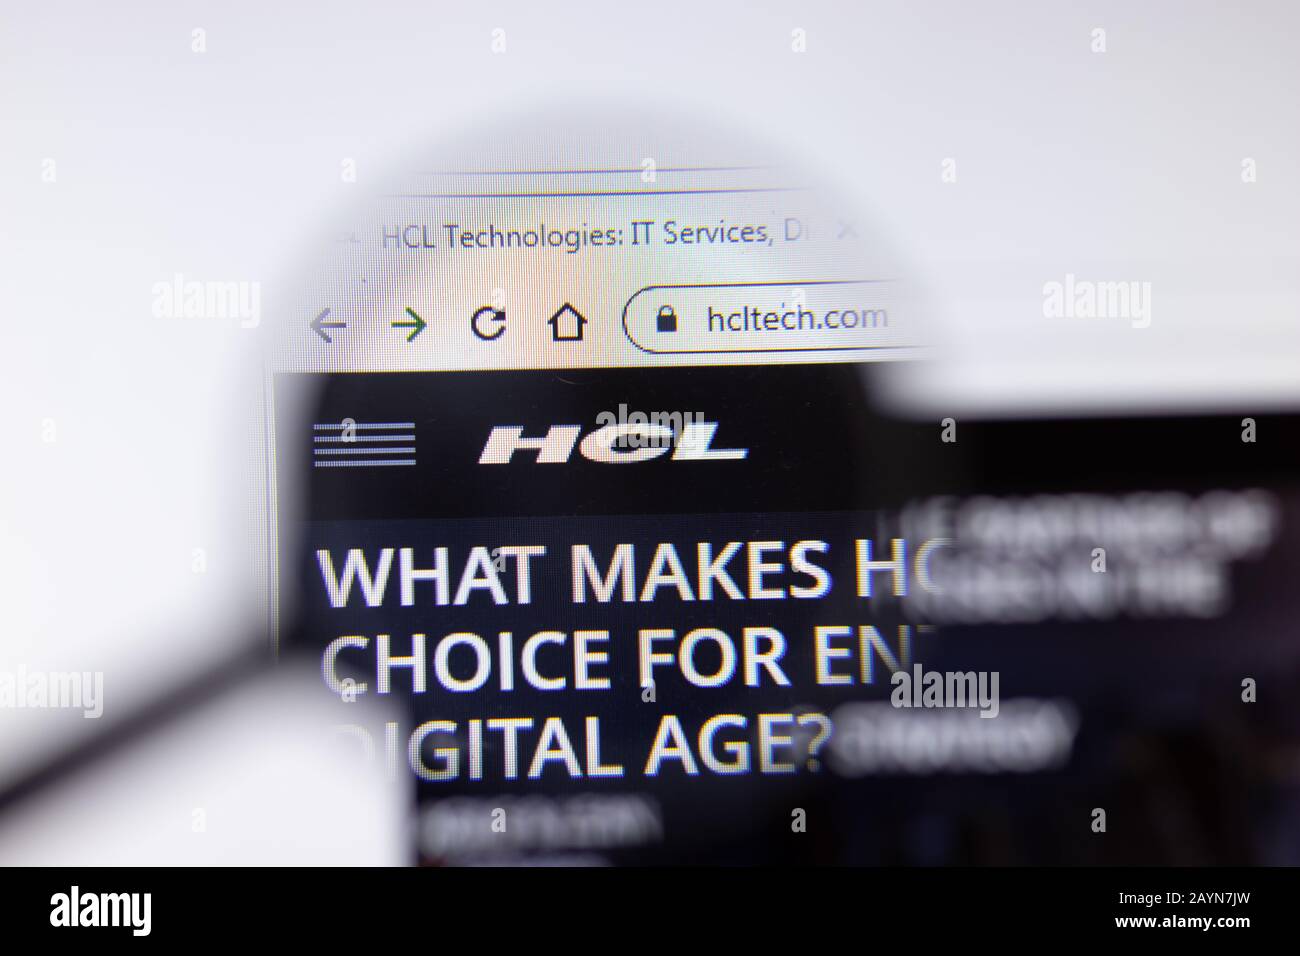 Saint-Petersburg, Russia - 18 February 2020: HCL Technologies company website page logo on laptop display. Screen with icon, Illustrative Editorial Stock Photo